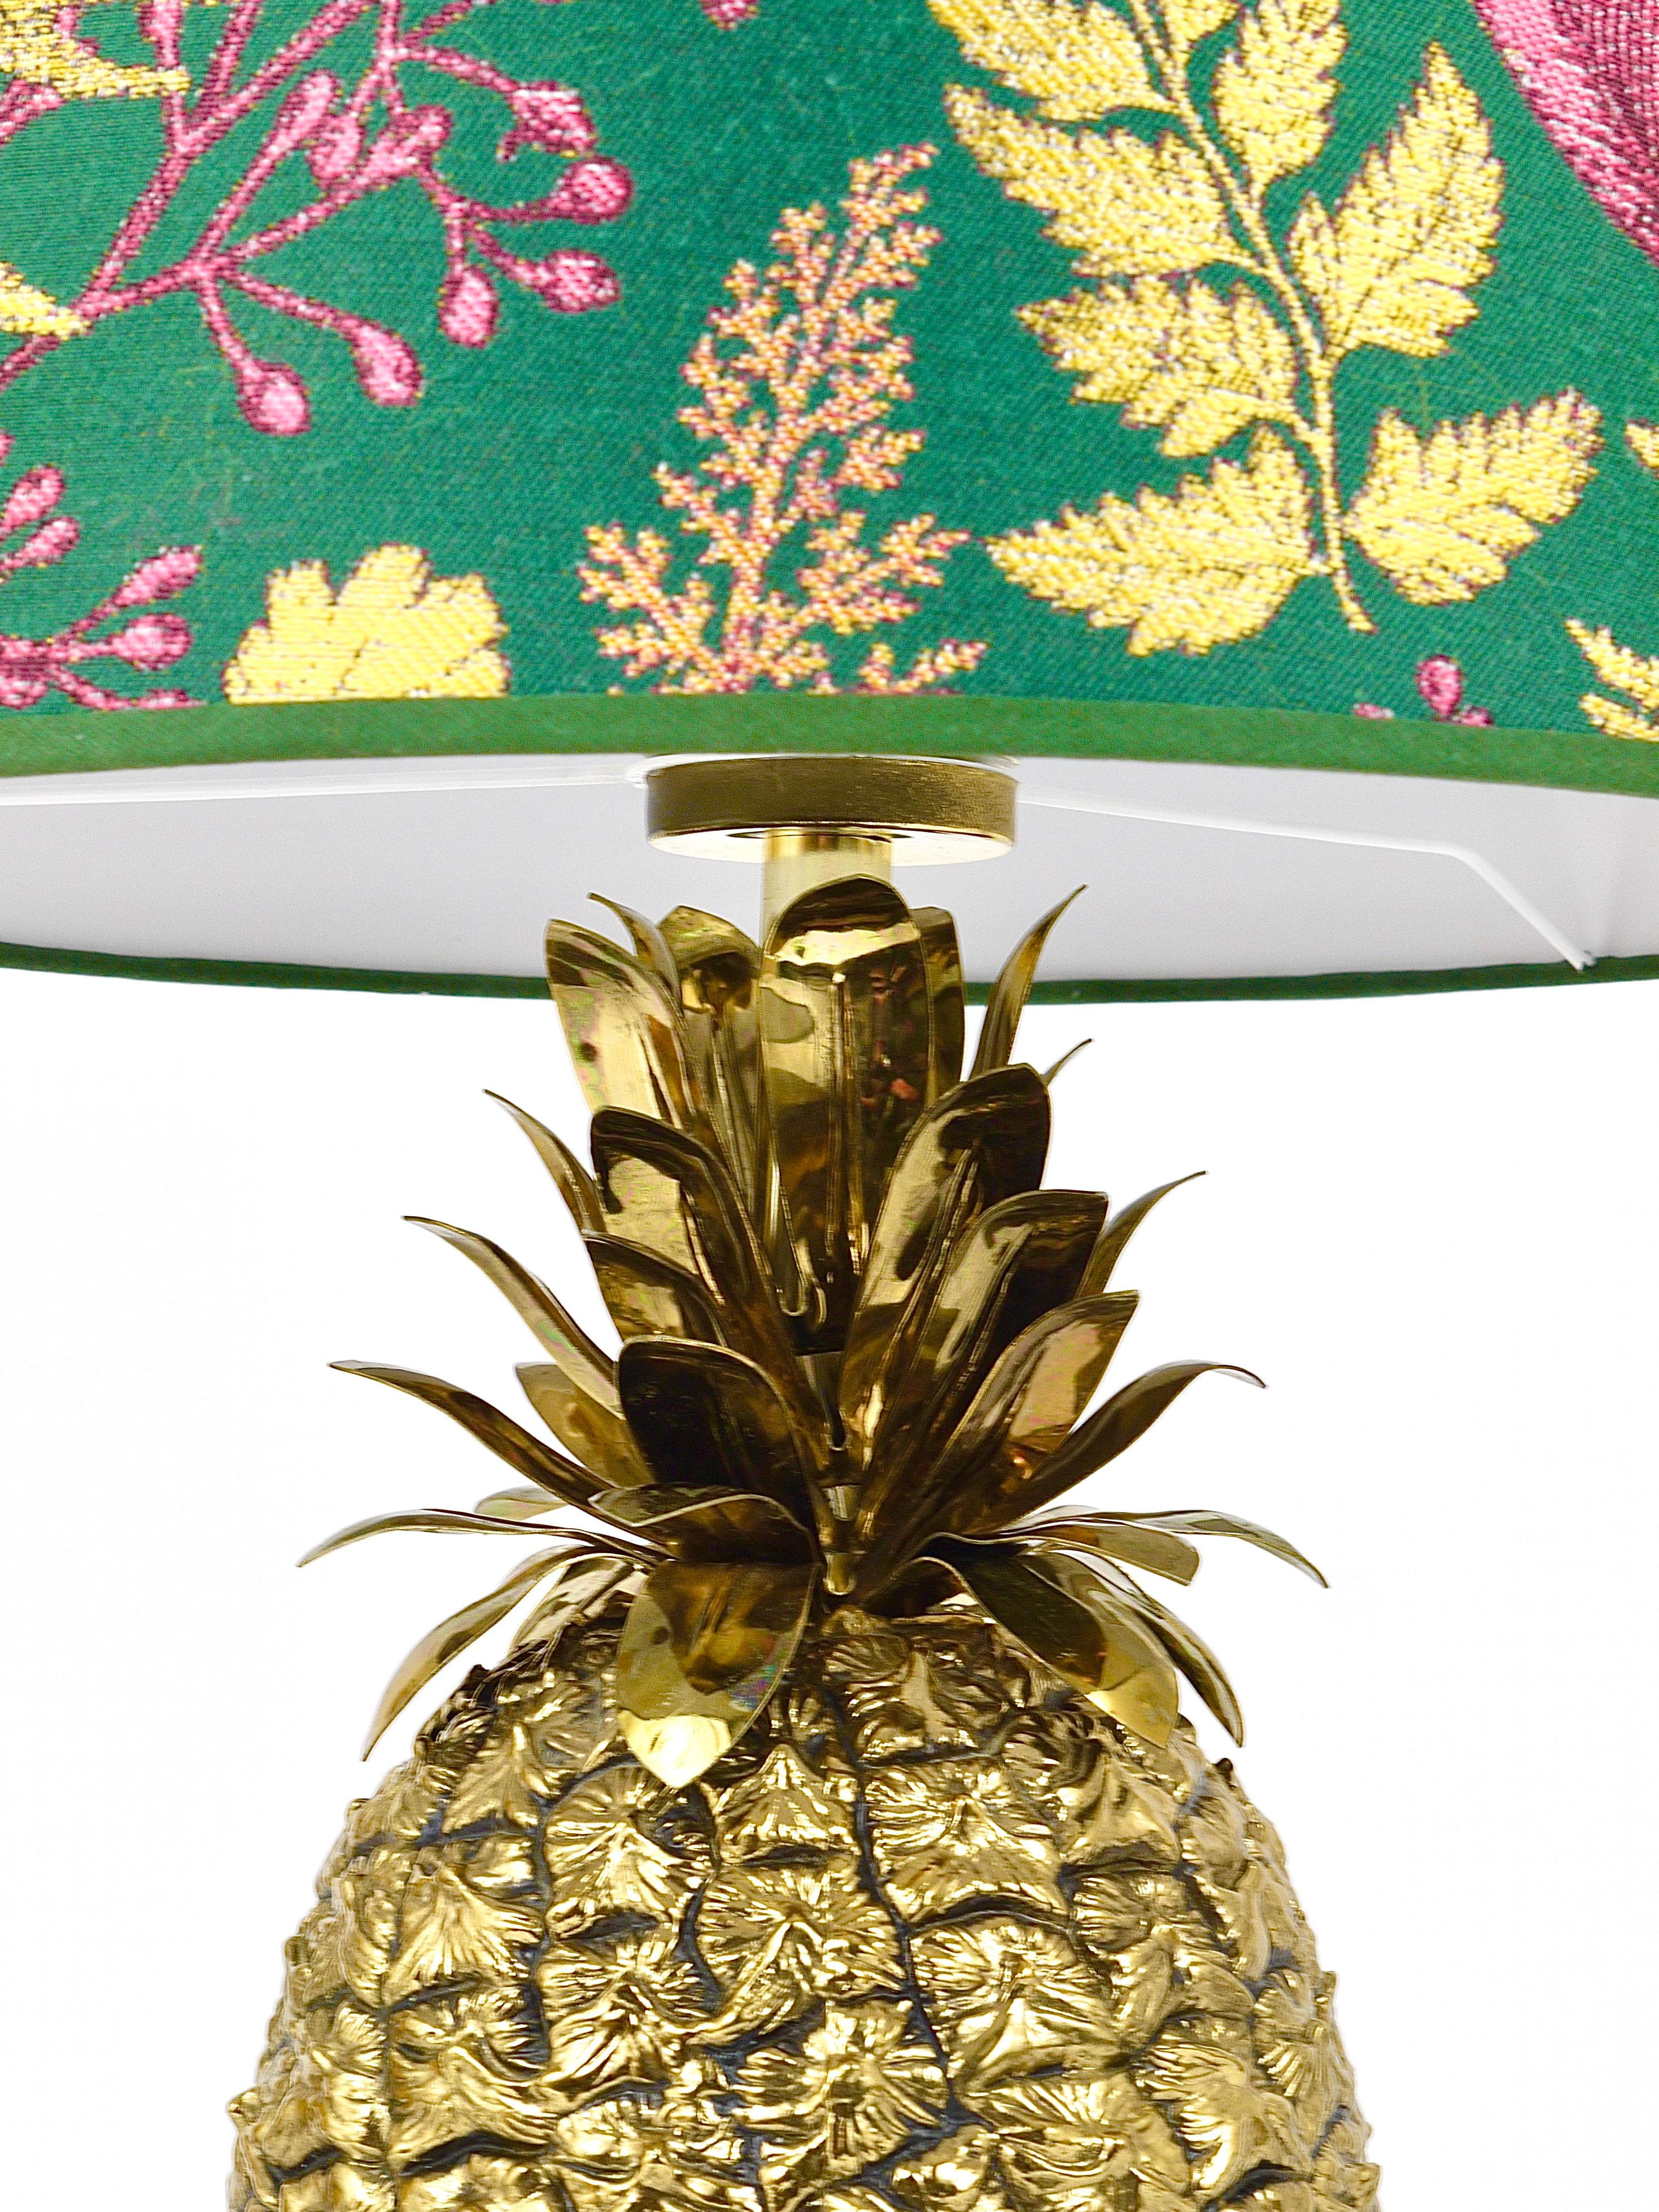 Mauro Manetti Hollywood Regency Pineapple Brass Table Lamp, Italy, 1970s For Sale 12